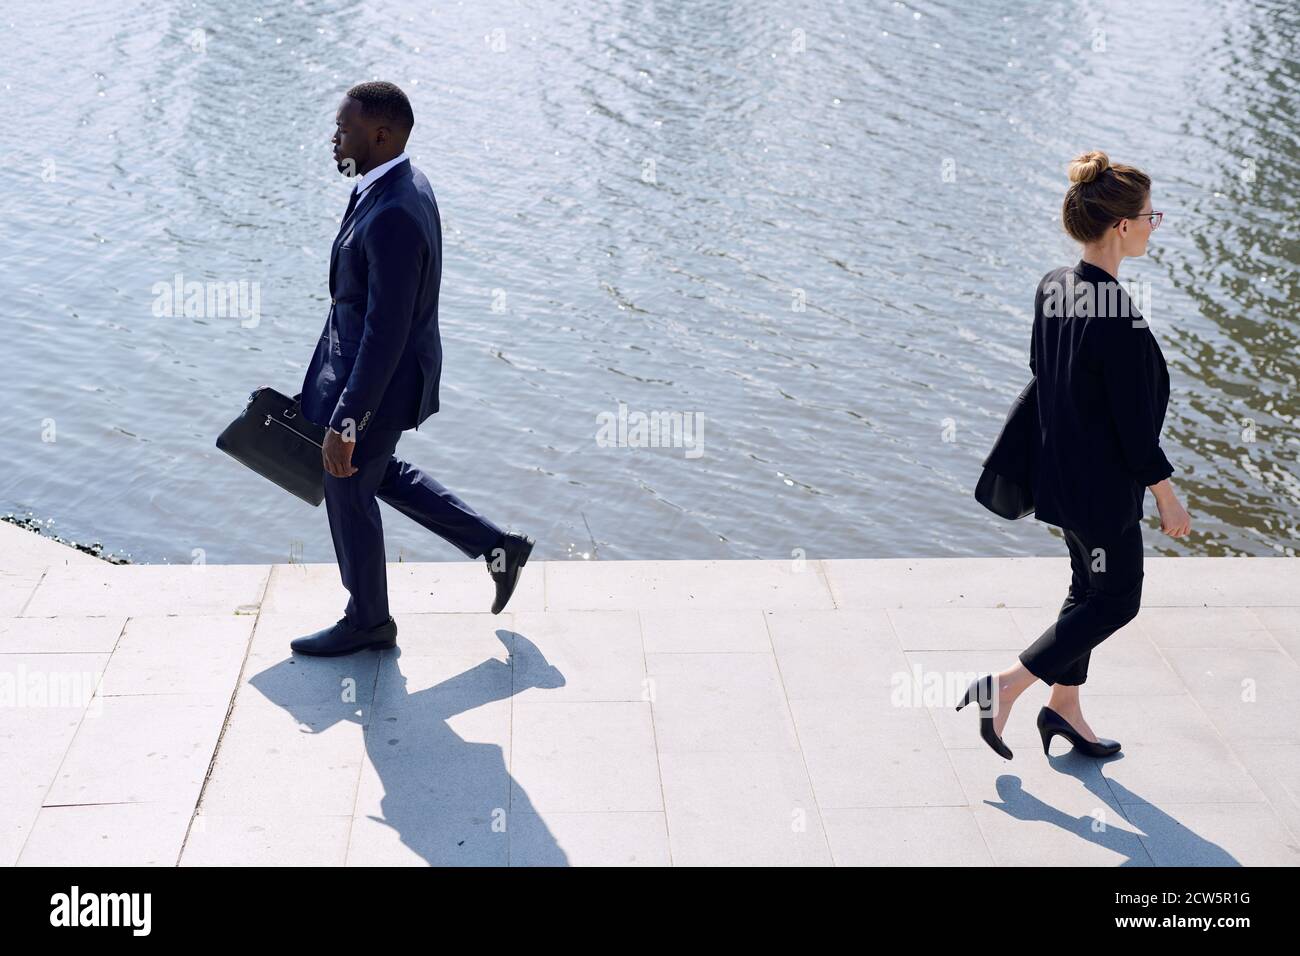 Contemporary business people in formalwear passing by each other by eiverside Stock Photo